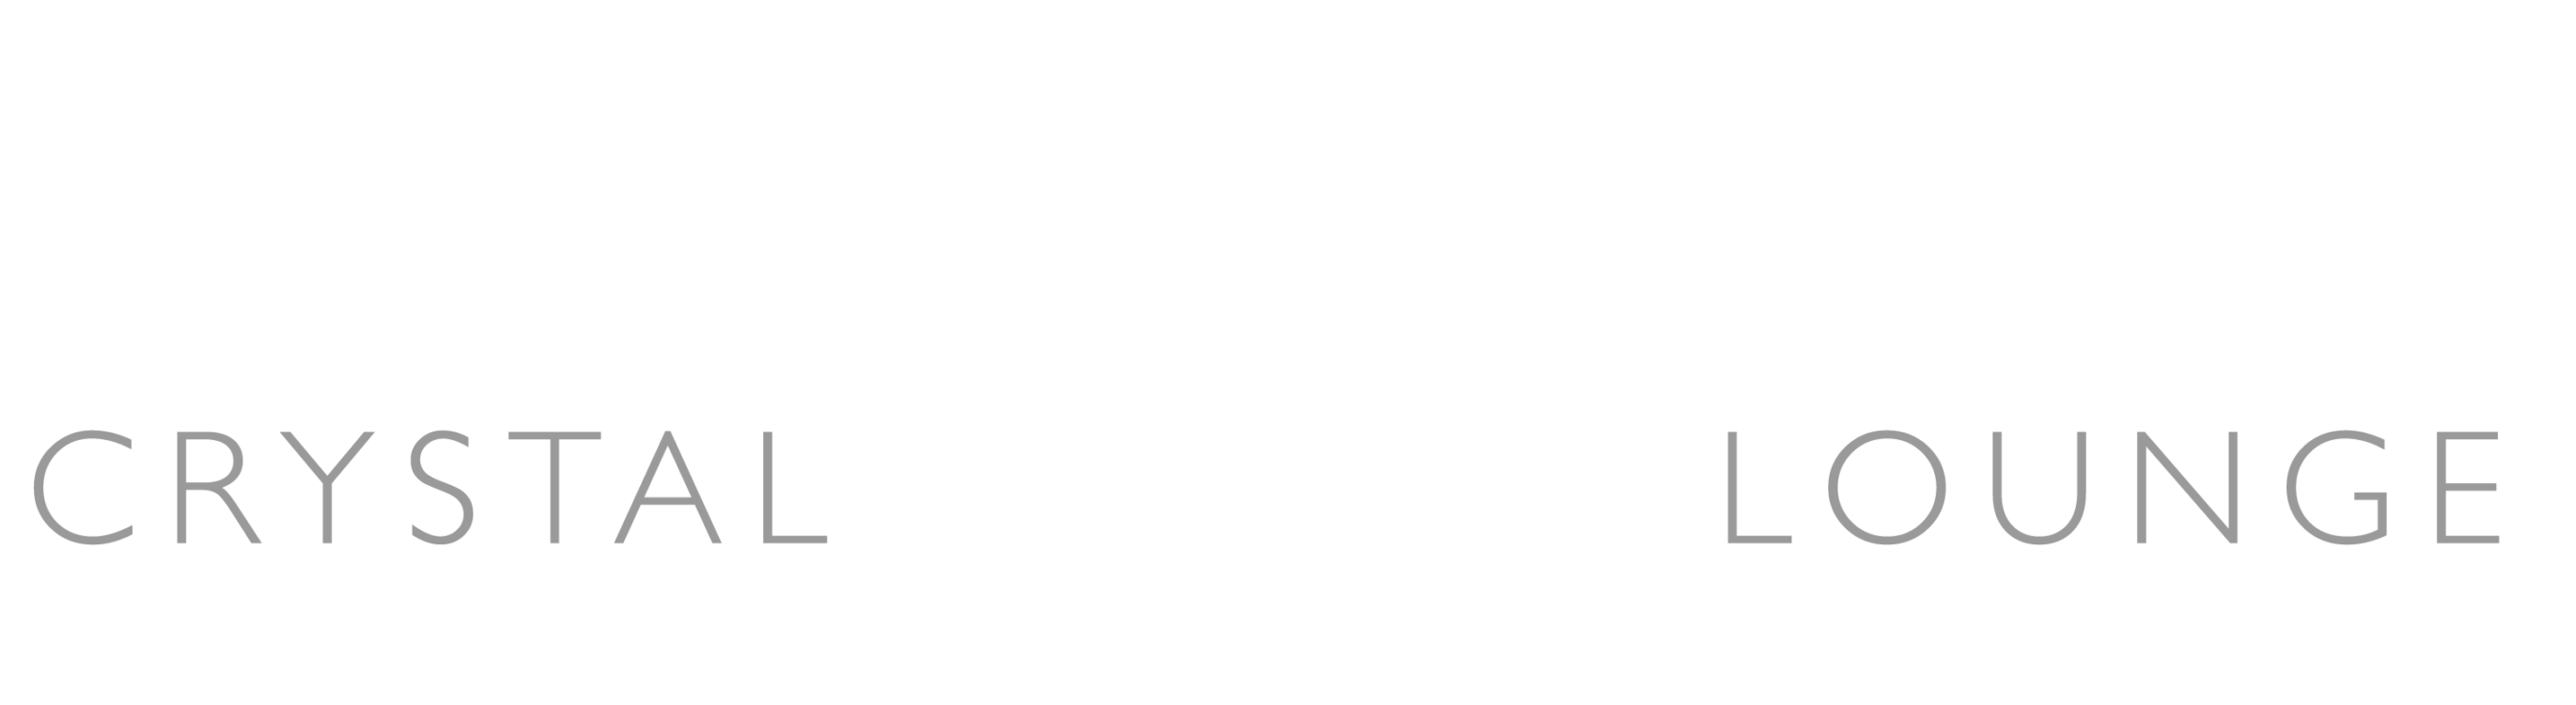 Crystal Sound Lounge: Corporate Wellness. Sound and Gong Baths in Central London